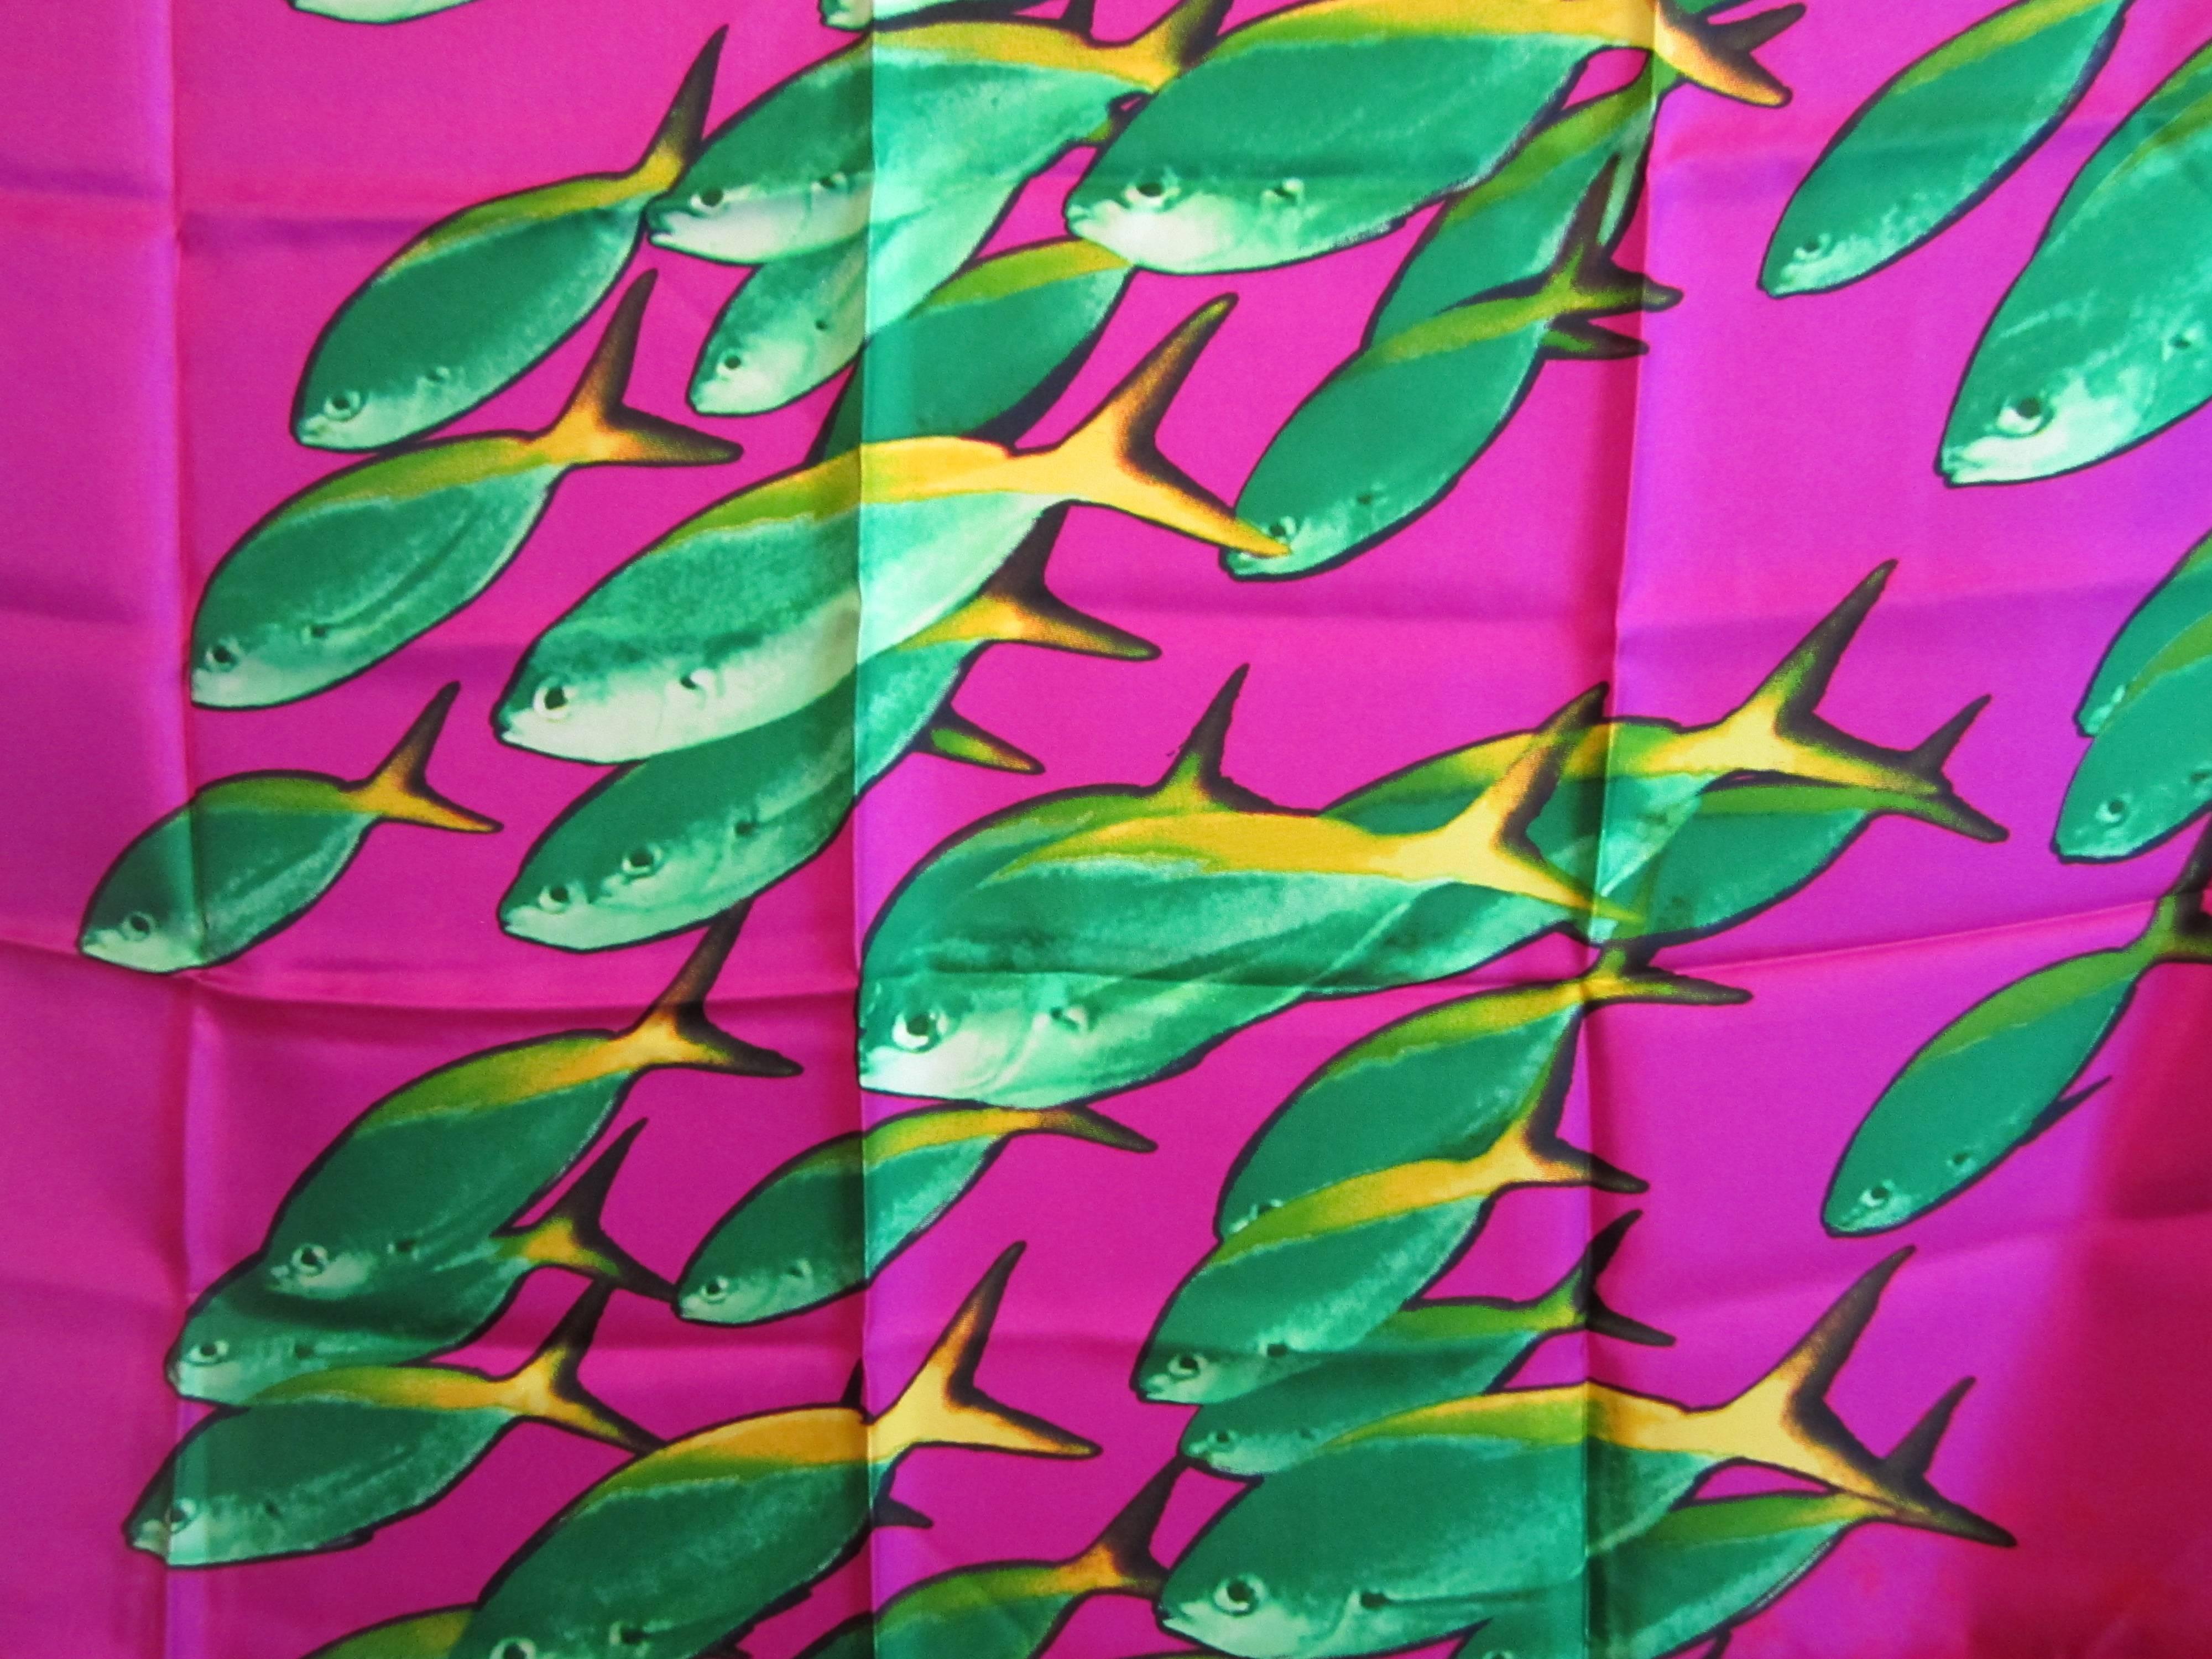 This is from a Vast Collection of Scarves that have never been worn. This one is Featuring an underwater scene of fish. Vibrant Purple and green. Made in Italy. Hand Rolled Silk. This is out of a massive collection of Contemporary Fashion as well as